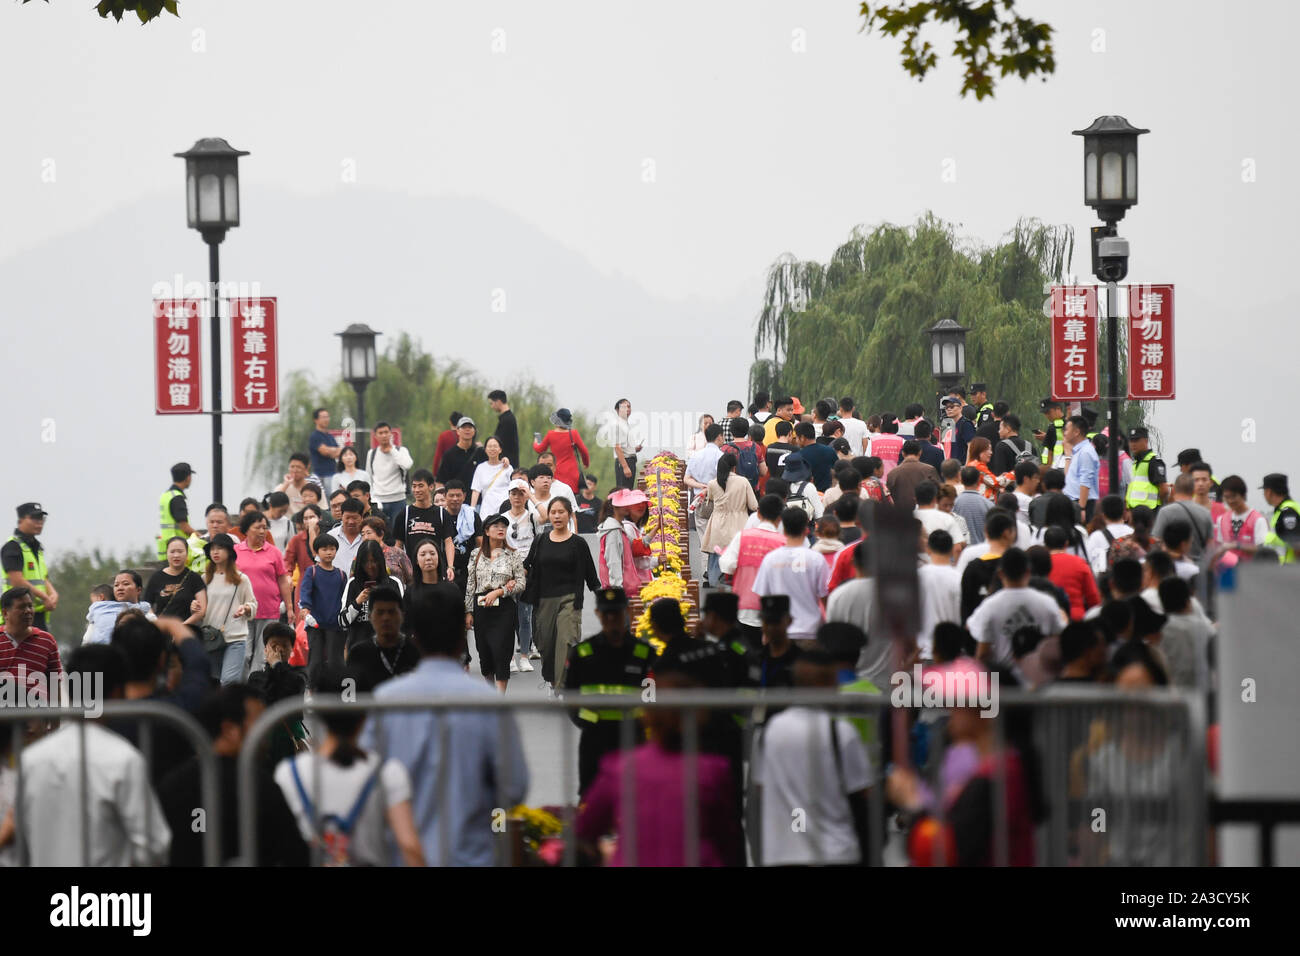 (191007) -- BEIJING, Oct. 7, 2019 (Xinhua) -- Tourists crowd the West Lake scenic area in Hangzhou, capital of Zhejiang Province, Oct. 7, 2019. According to the Ministry of Culture and Tourism (MCT), Chinese tourists made 782 million visits to recreational and cultural activities during the week-long National Day holiday, marking a year-on-year increase of 7.81 percent. China's tourism industry has raked in over 649.71 billion yuan (about 90.9 billion U.S. dollars) in revenue from domestic tourists during the holiday, up 8.47 percent from a year earlier. (Xinhua/Huang Zongzhi) Stock Photo